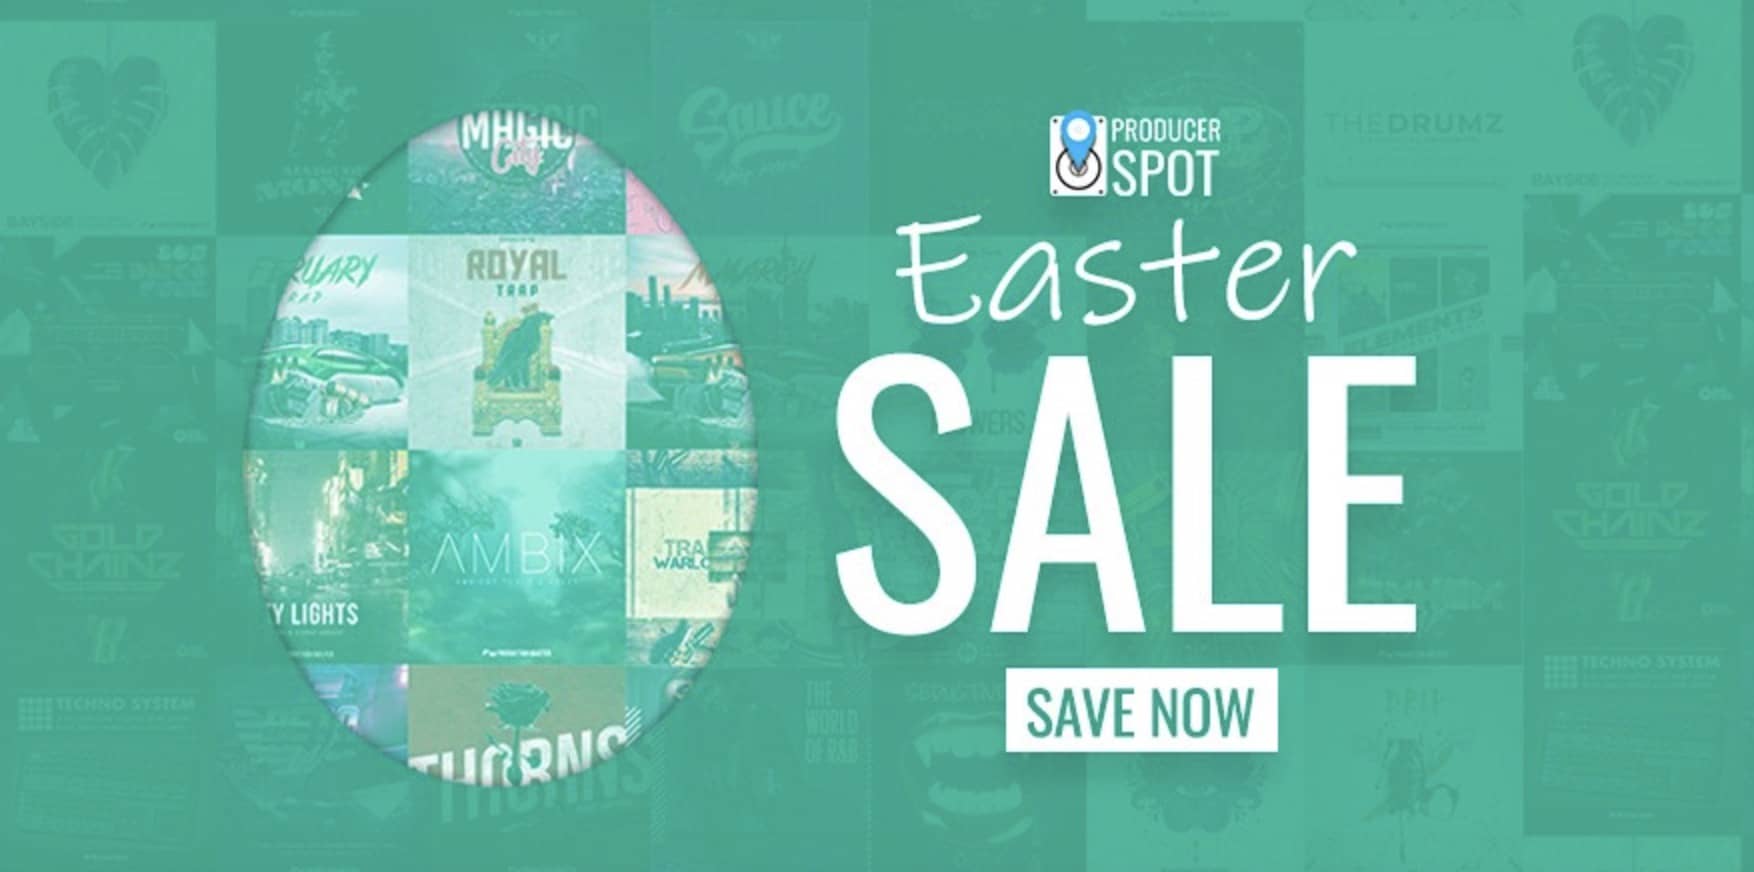 ProducerSpot Running an Easter Sale 50% Off